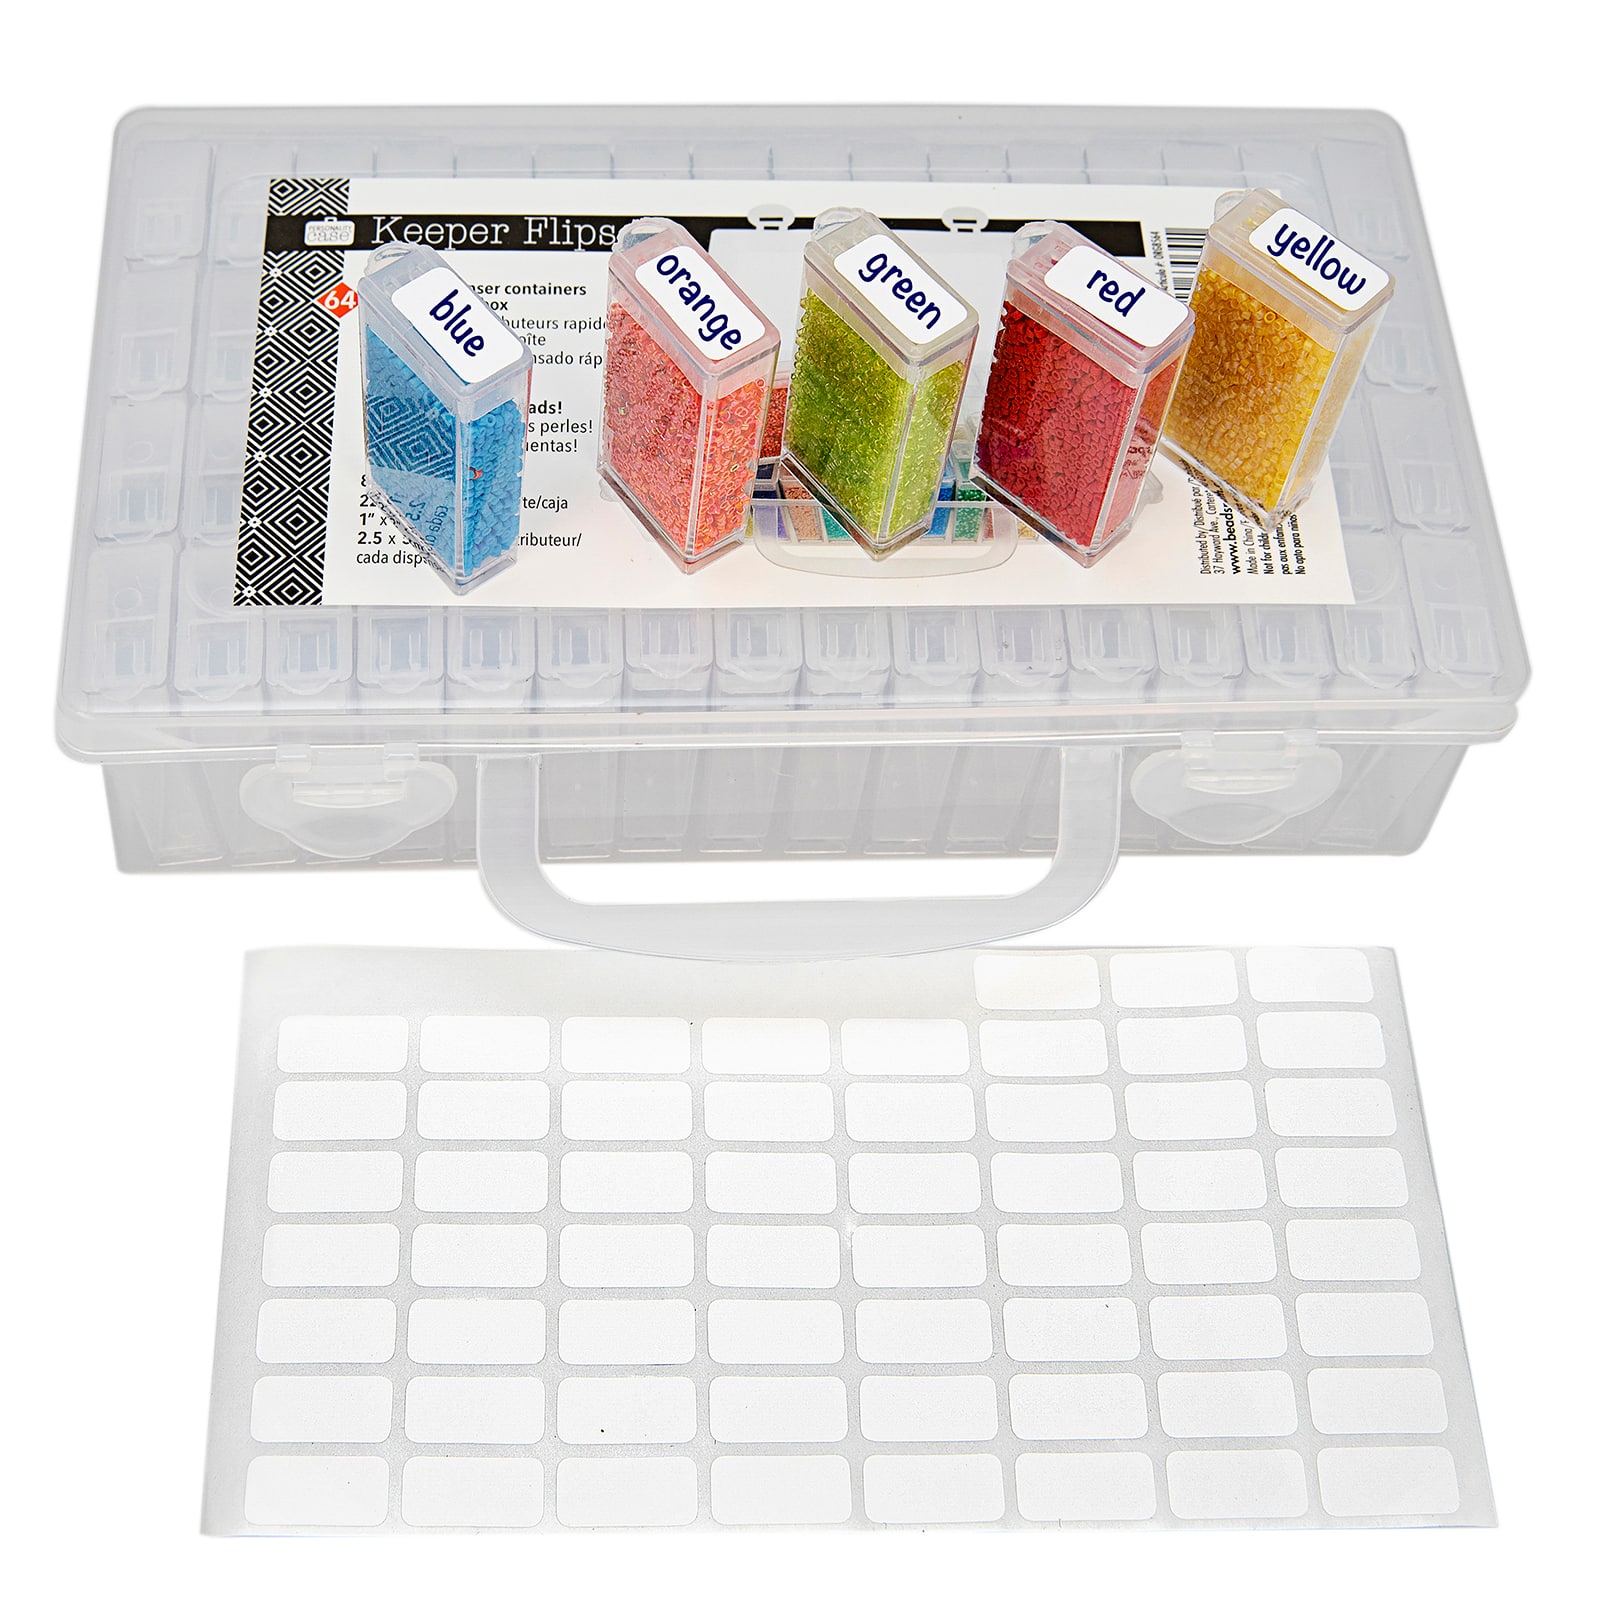 VILLCASE 3pcs Boxes apple storage box beads craft storage bead holder  organizer bead case loose bead container bead organizer small item carriers  bead